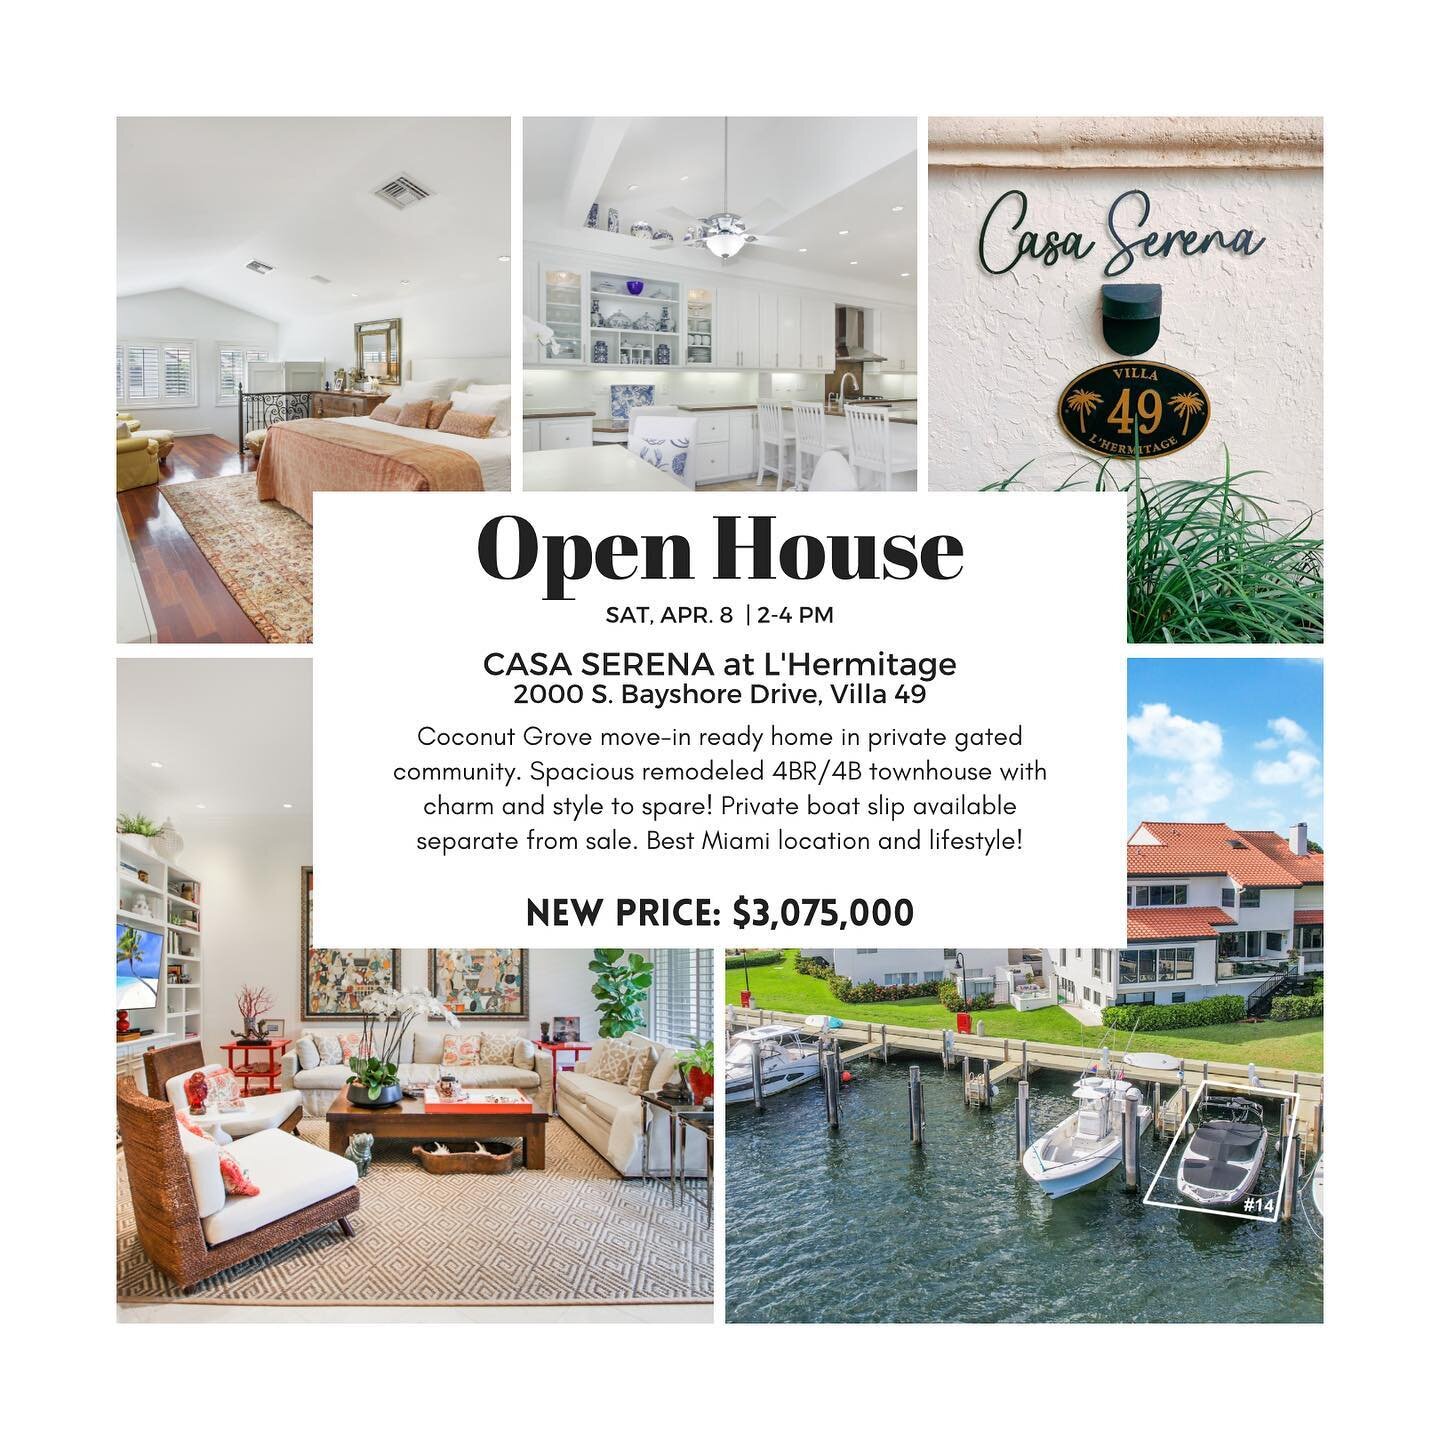 NEW IMPROVED PRICE!

Grove Location
Grove Lifestyle

Spectacular move-in ready townhouse in exclusive L'Hermitage, the private Coconut Grove gated enclave. Great amenities, 24/7 security, close to everything. Coconut Grove at its best!

*Deeded boat 